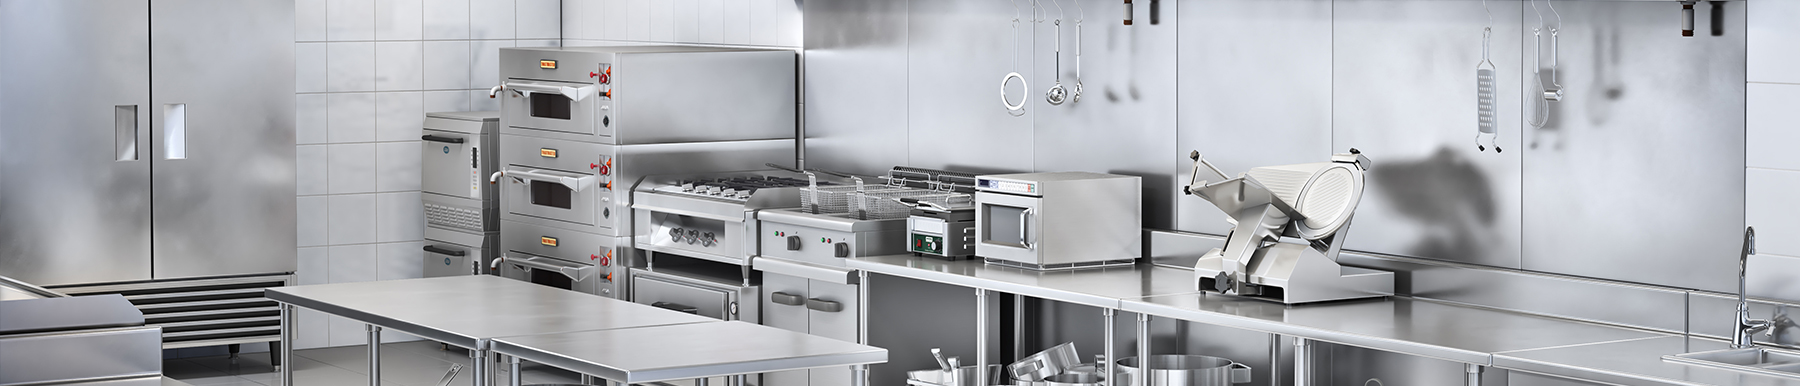 Catering Equipment Suppliers Near Poole | H2 Catering Equipment Catering Equipment